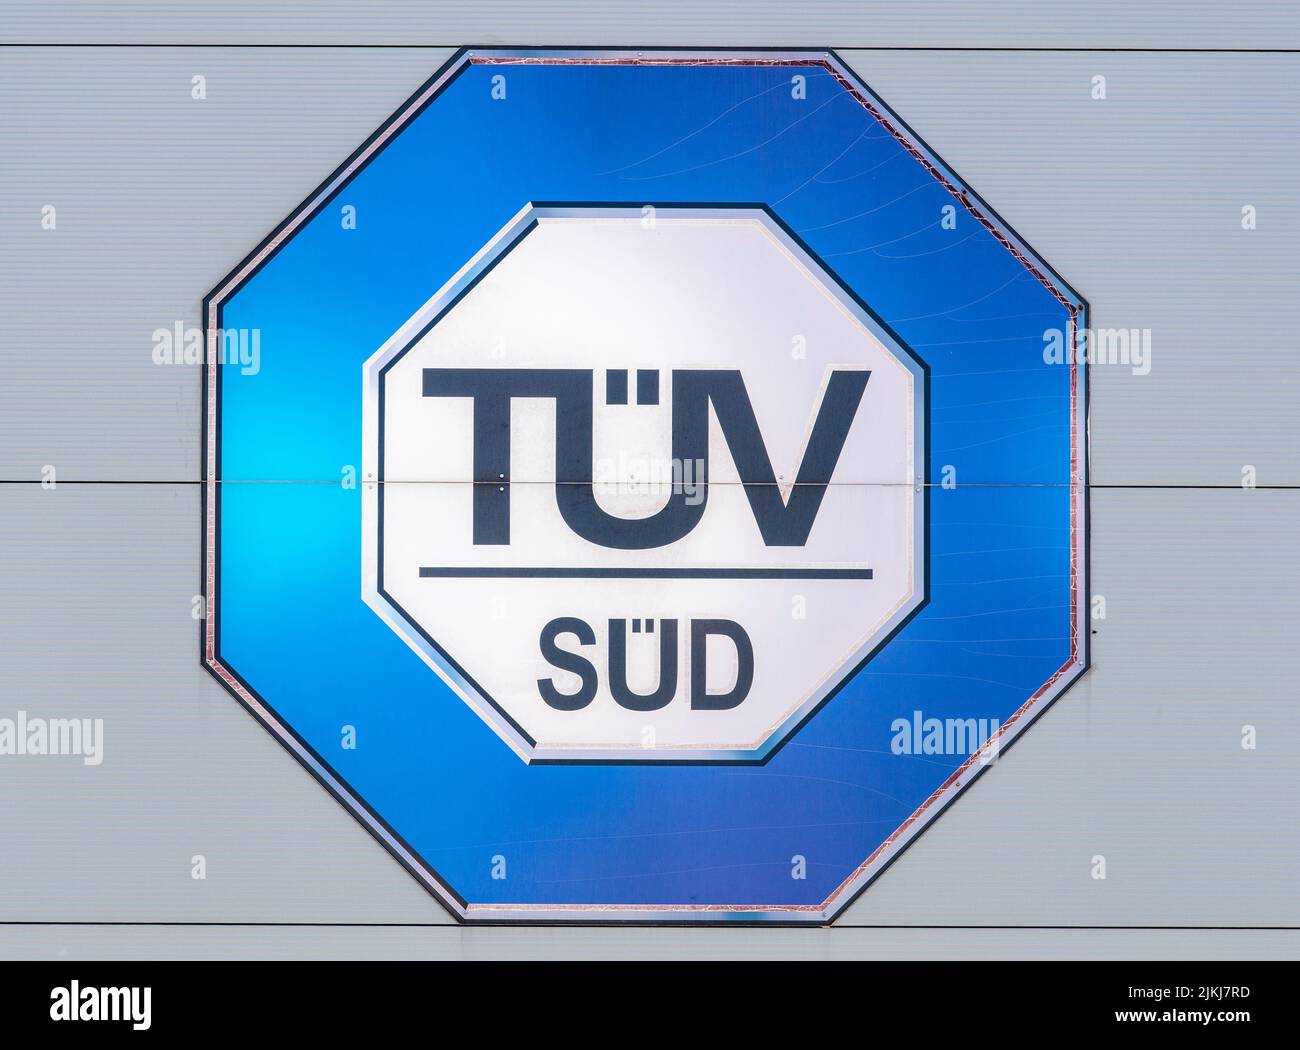 Advertising and company sign of TÜV Süd Stock Photo